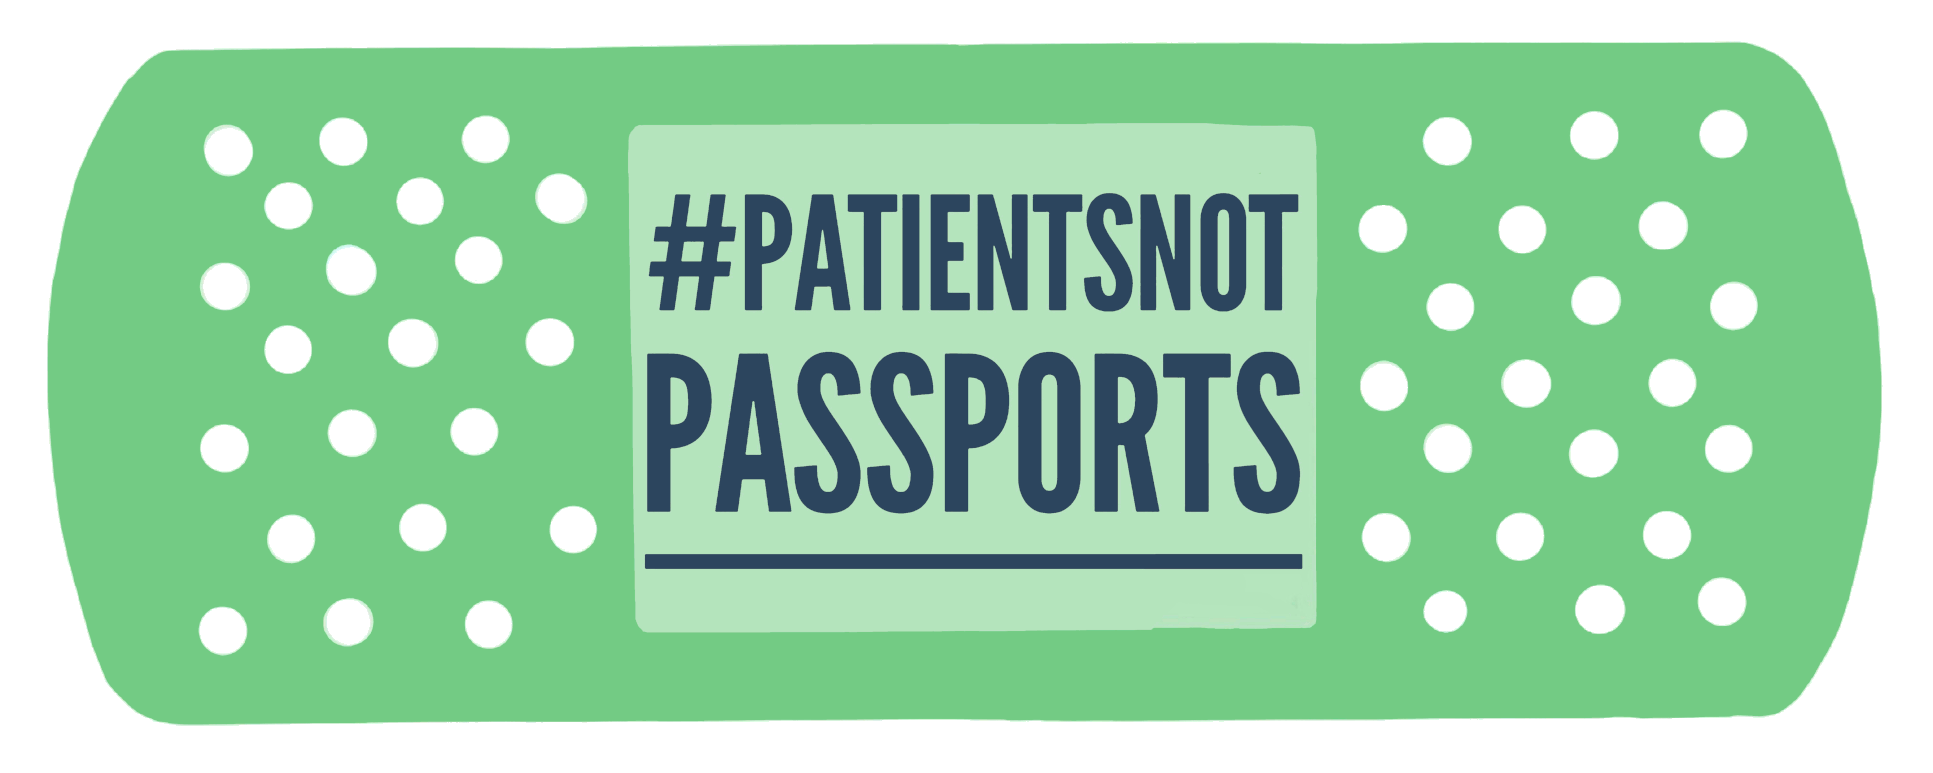 Patients Not Passports Greater Manchester: Taking Action to End the Hostile Environment